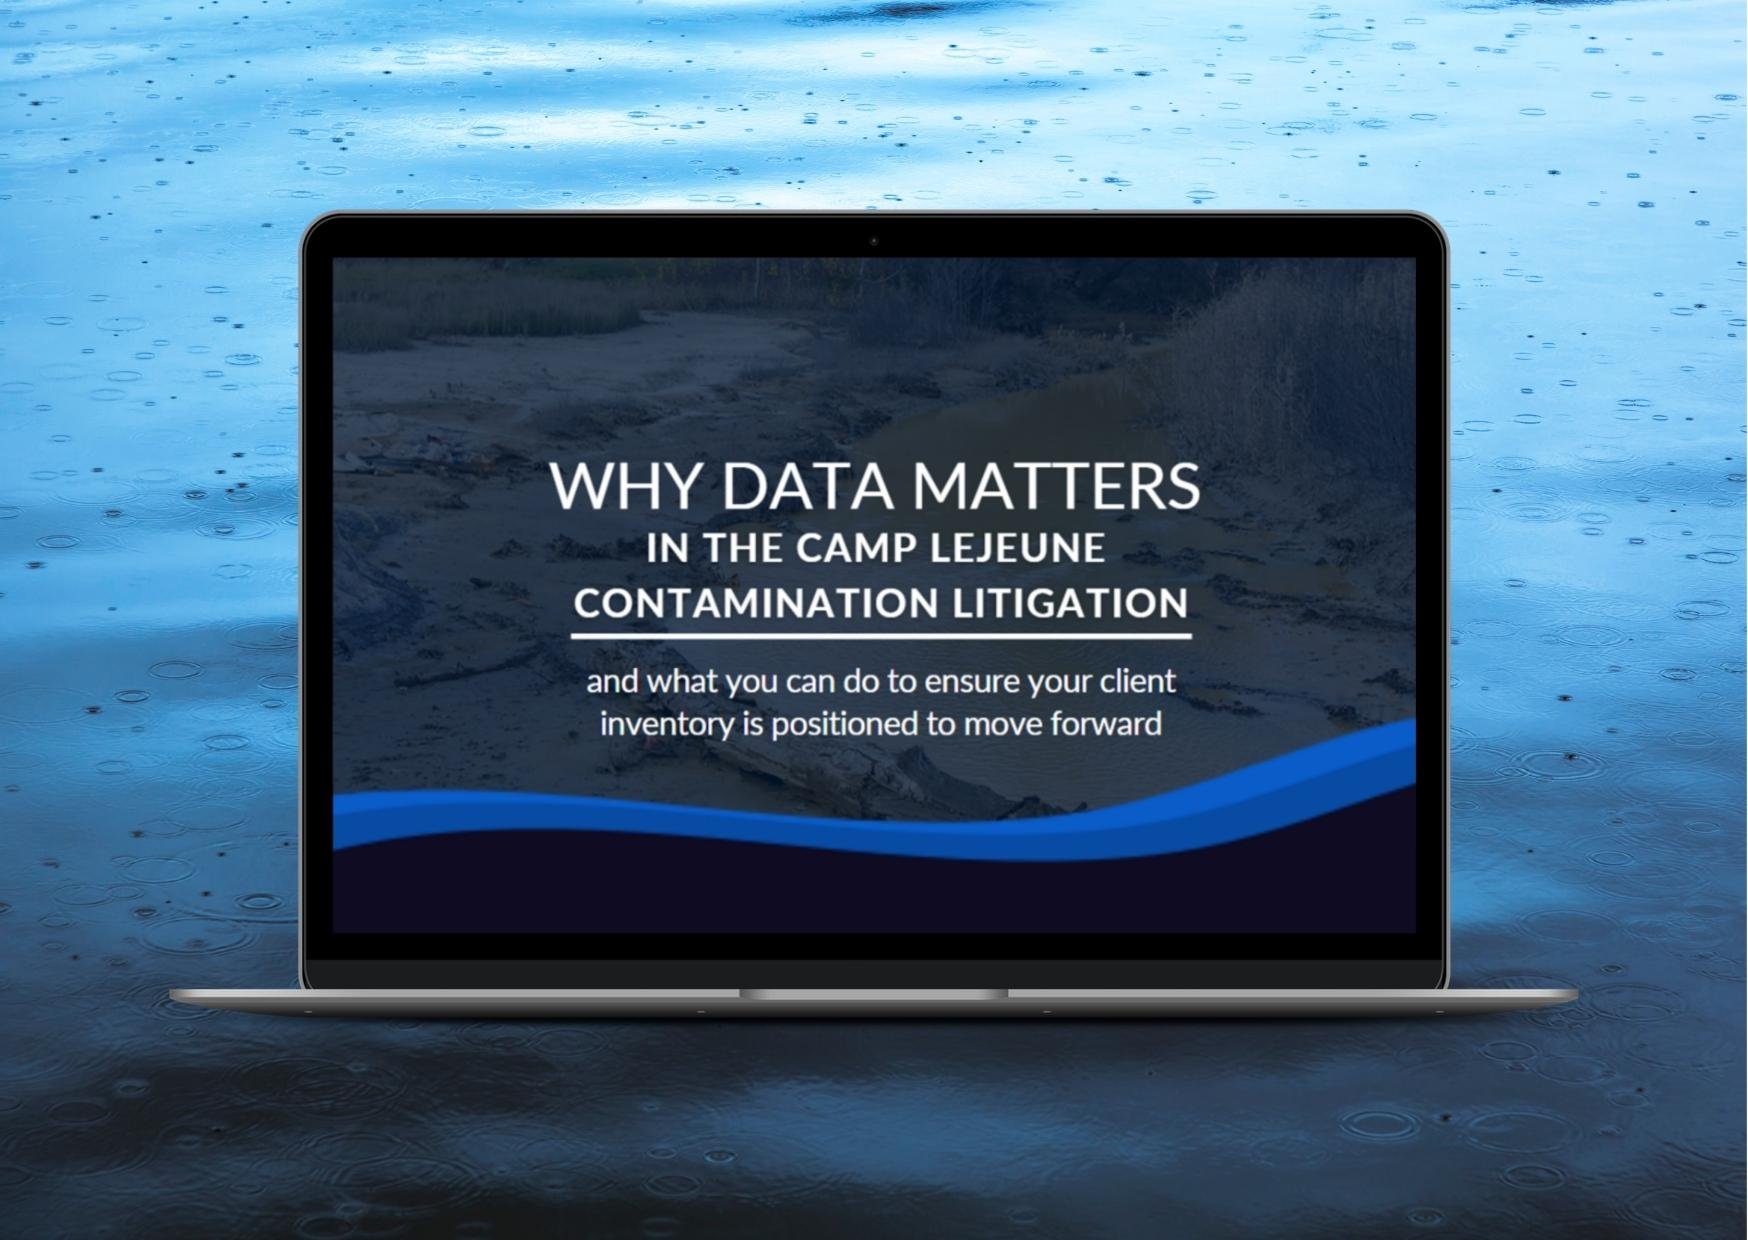 Why Data Matters in the Camp Lejeune Contamination Litigation